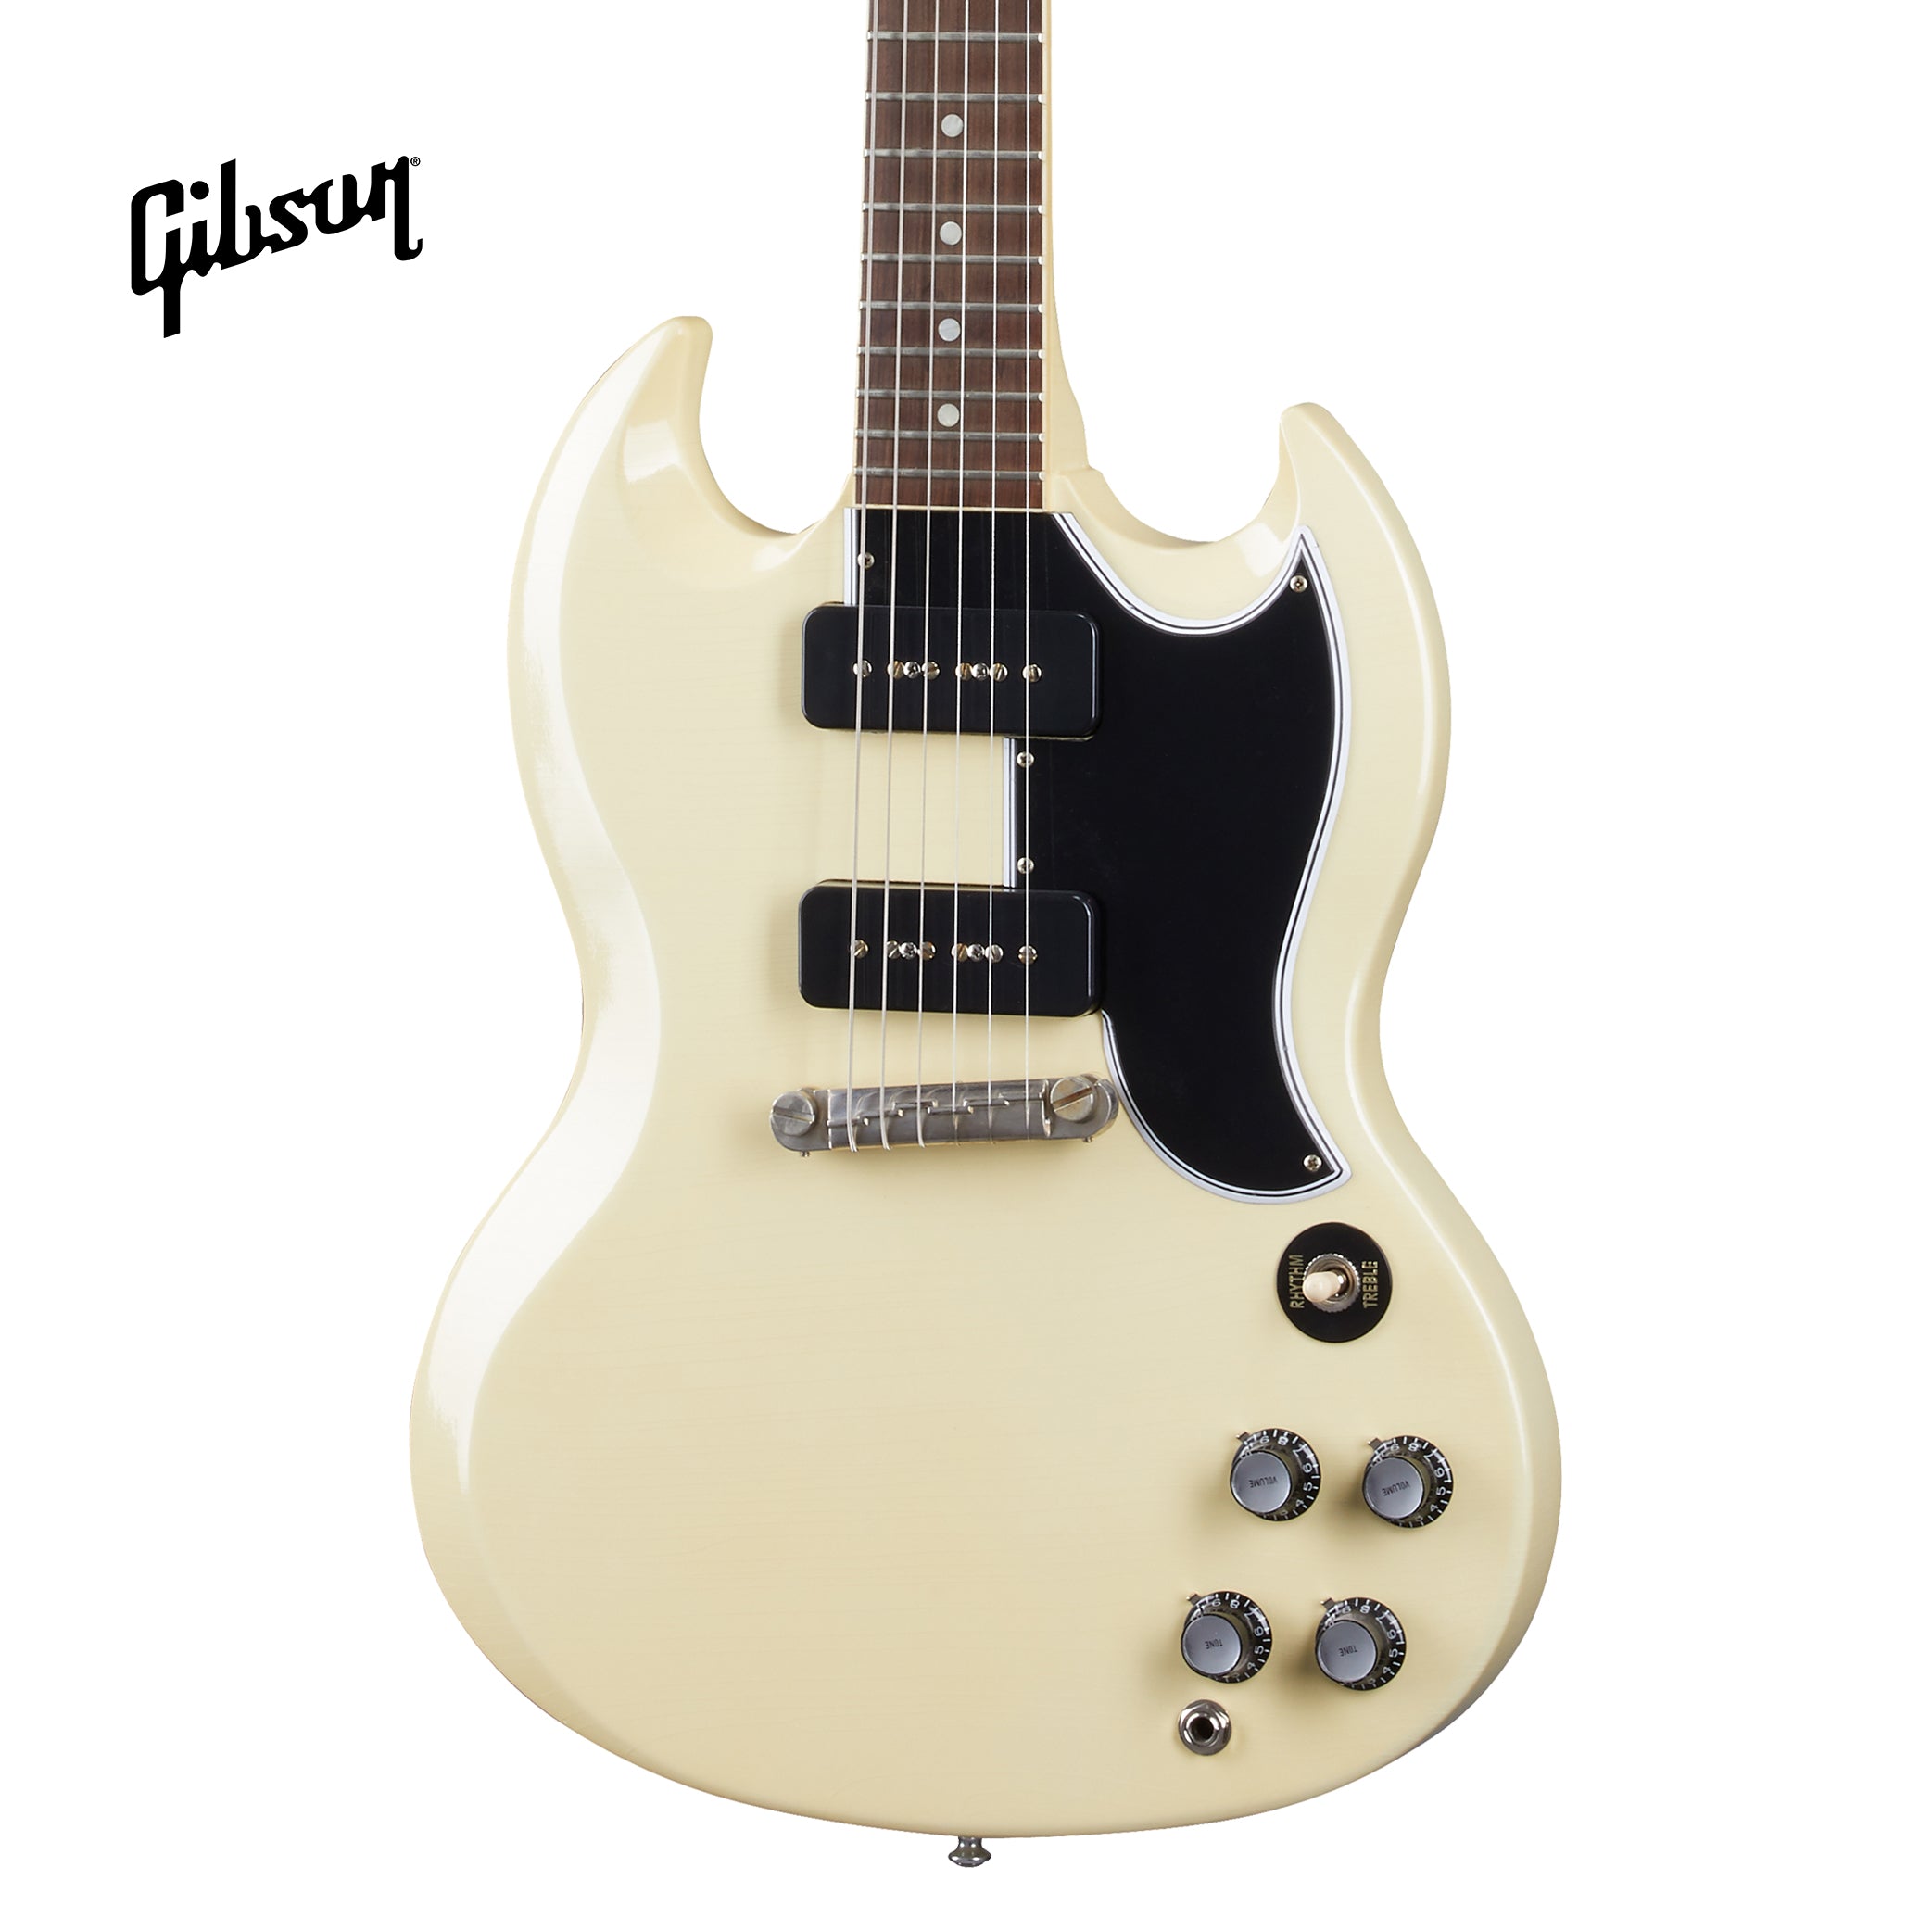 GIBSON 1963 SG SPECIAL REISSUE LIGHTNING BAR ULTRA LIGHT AGED ELECTRIC GUITAR - CLASSIC WHITE